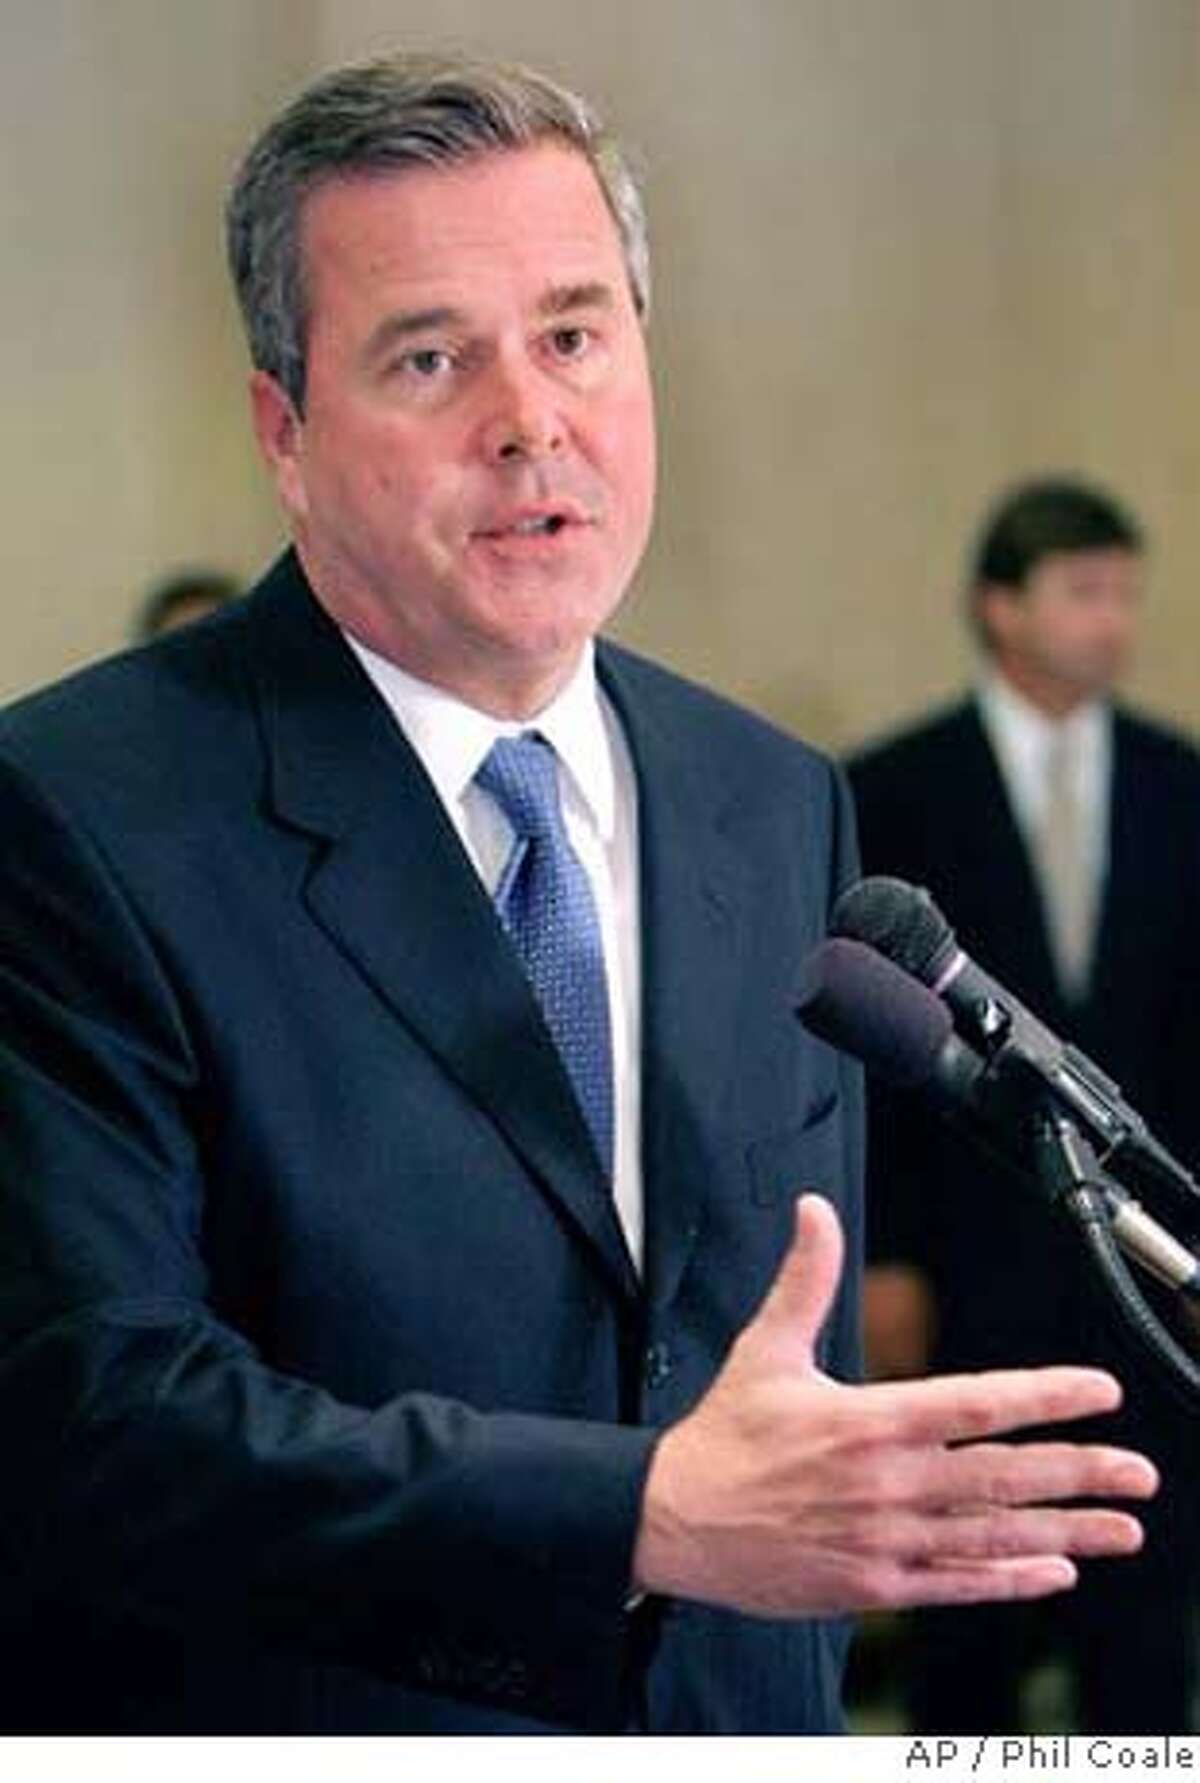 Gov. Jeb Bush, who has asked a prosecutor to investigate why Terri Schiavo collapsed 15 years ago, calling into question a gap in time from when her husband found the woman and called 911, answers questions about the case at a news conference, Friday, June 17, 2005, in Tallahassee, Fla. (AP Photo/Phil Coale) Ran on: 06-18-2005 Gov. Jeb Bush has prompted an investigation into Terri Schiavos 1990 collapse. Ran on: 06-18-2005 Gov. Jeb Bush has prompted an investigation into Terri Schiavos 1990 collapse. RETRANSMISSION FOR IMPROVED TONE